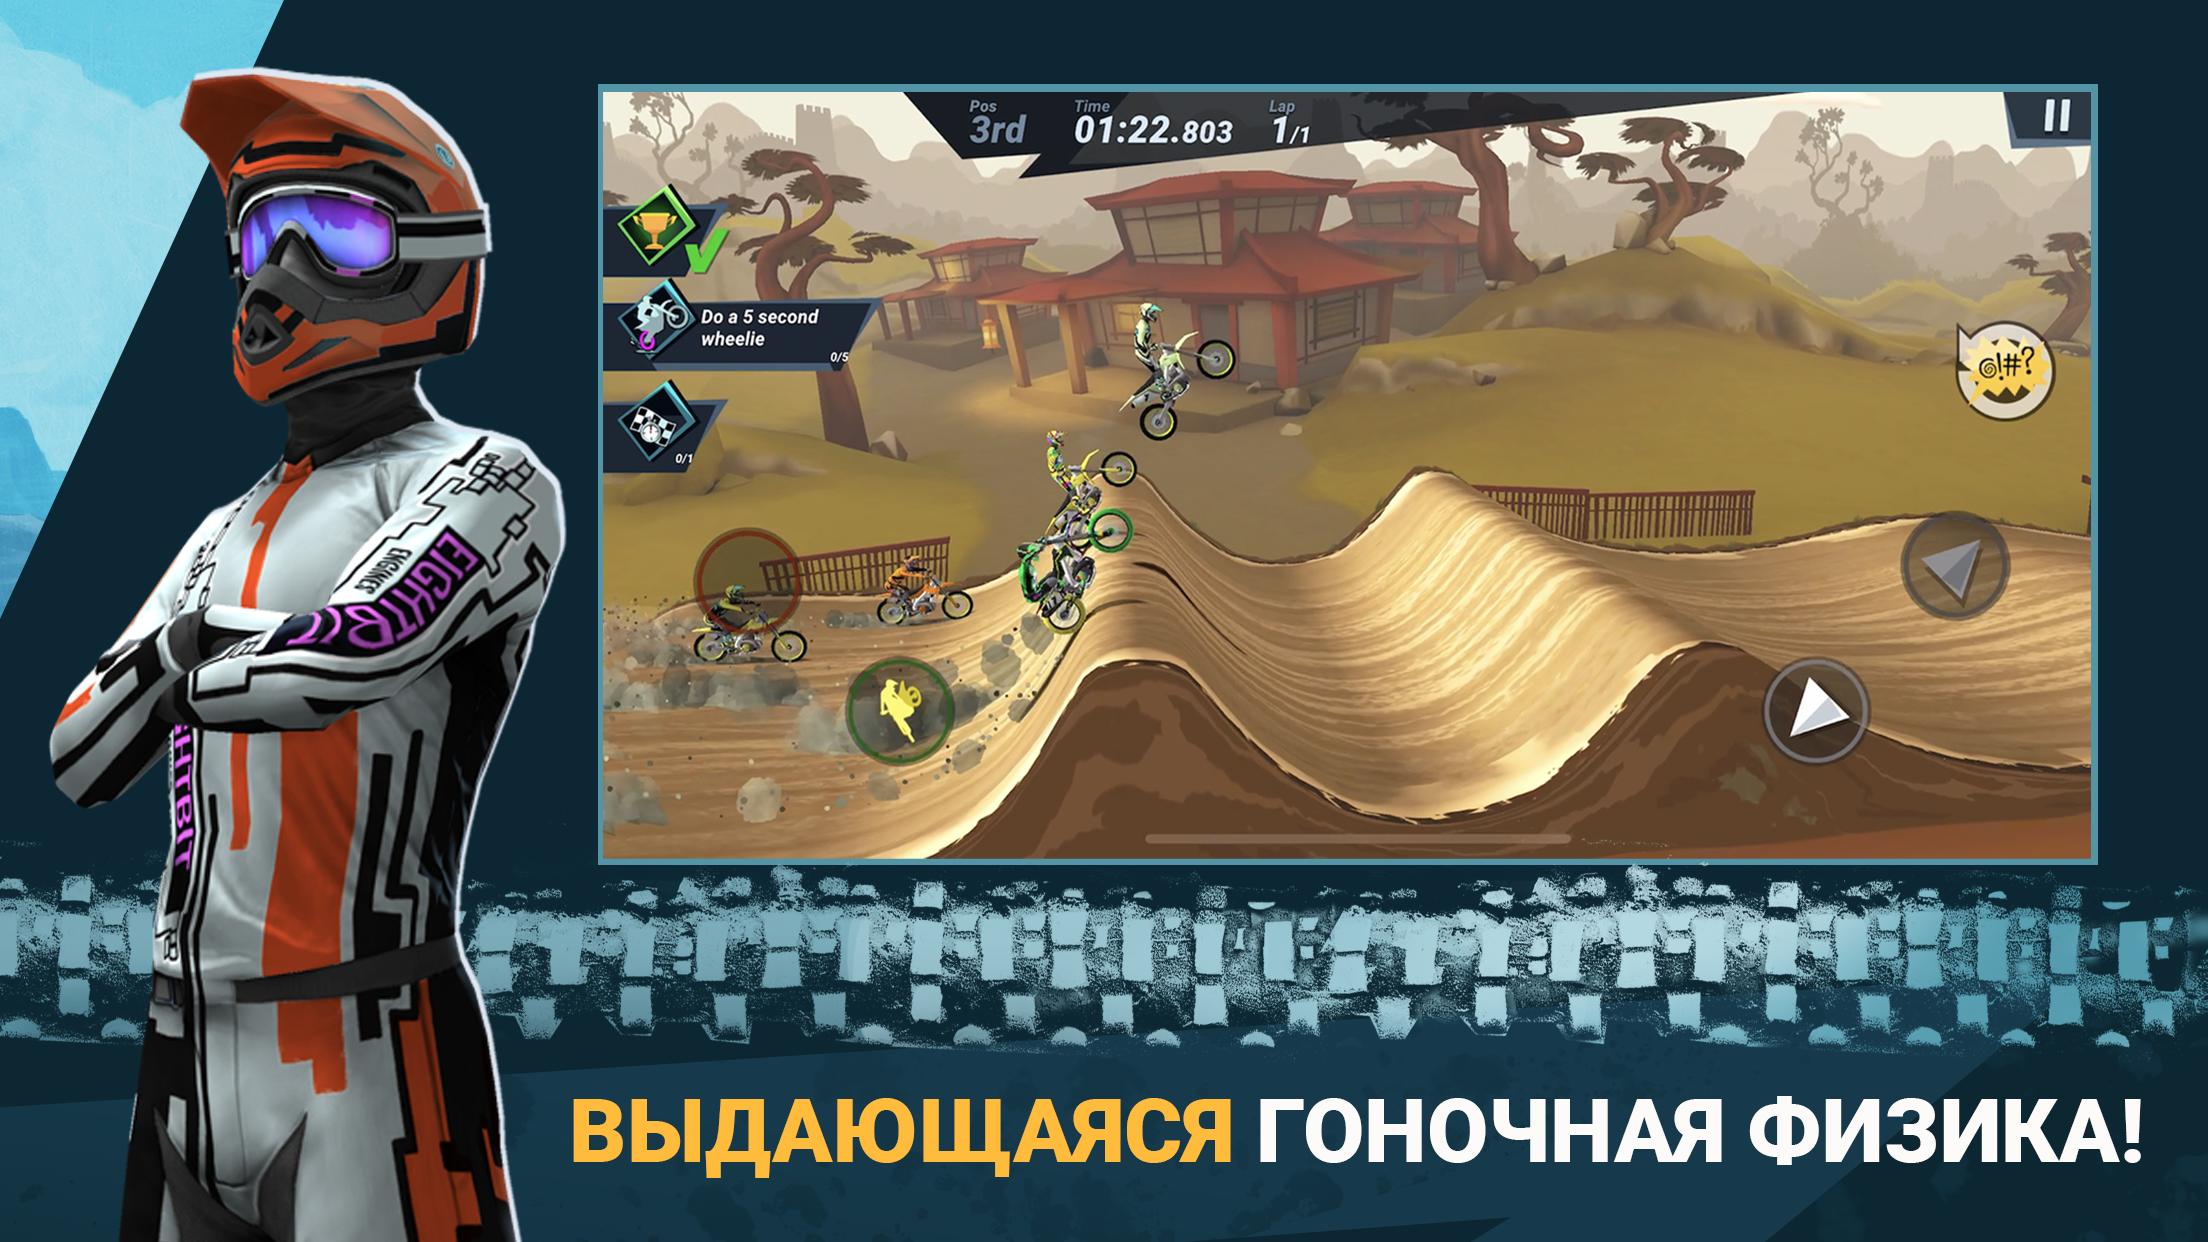 Mad skill 3. Мад скилс мотокросс 3. Игра мотокросс. Игры про мотокросс на андроид. Mad skills Motocross.